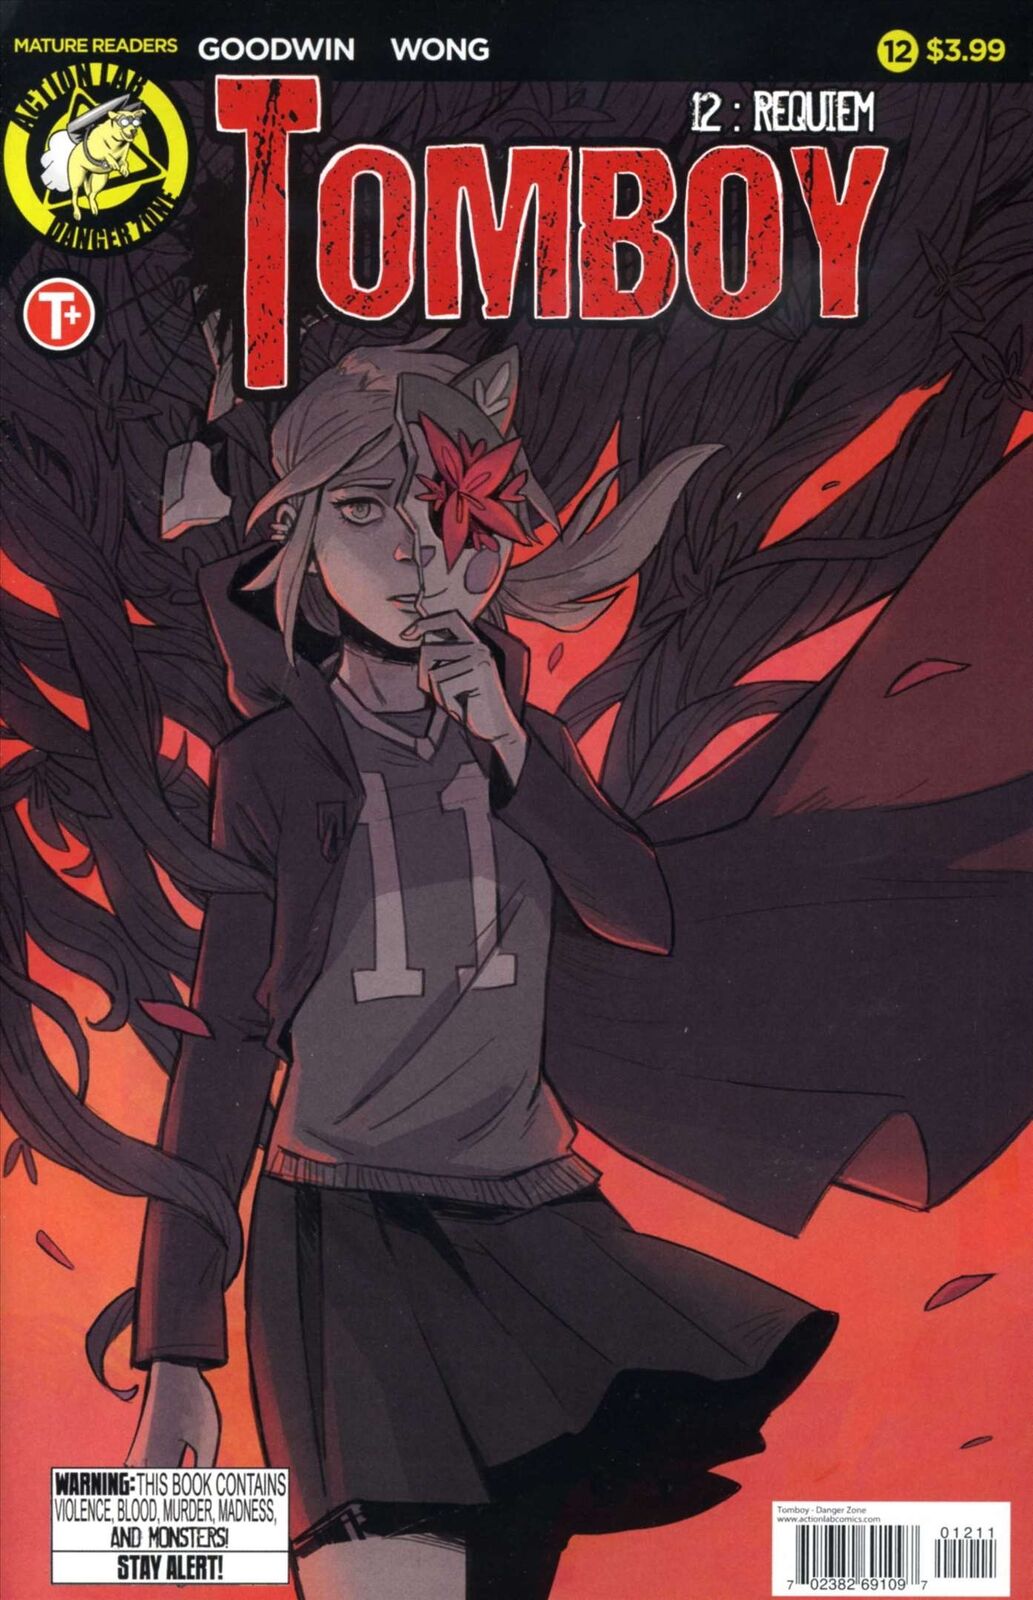 Tomboy #12A FN; Action Lab | Last Issue - we combine shipping